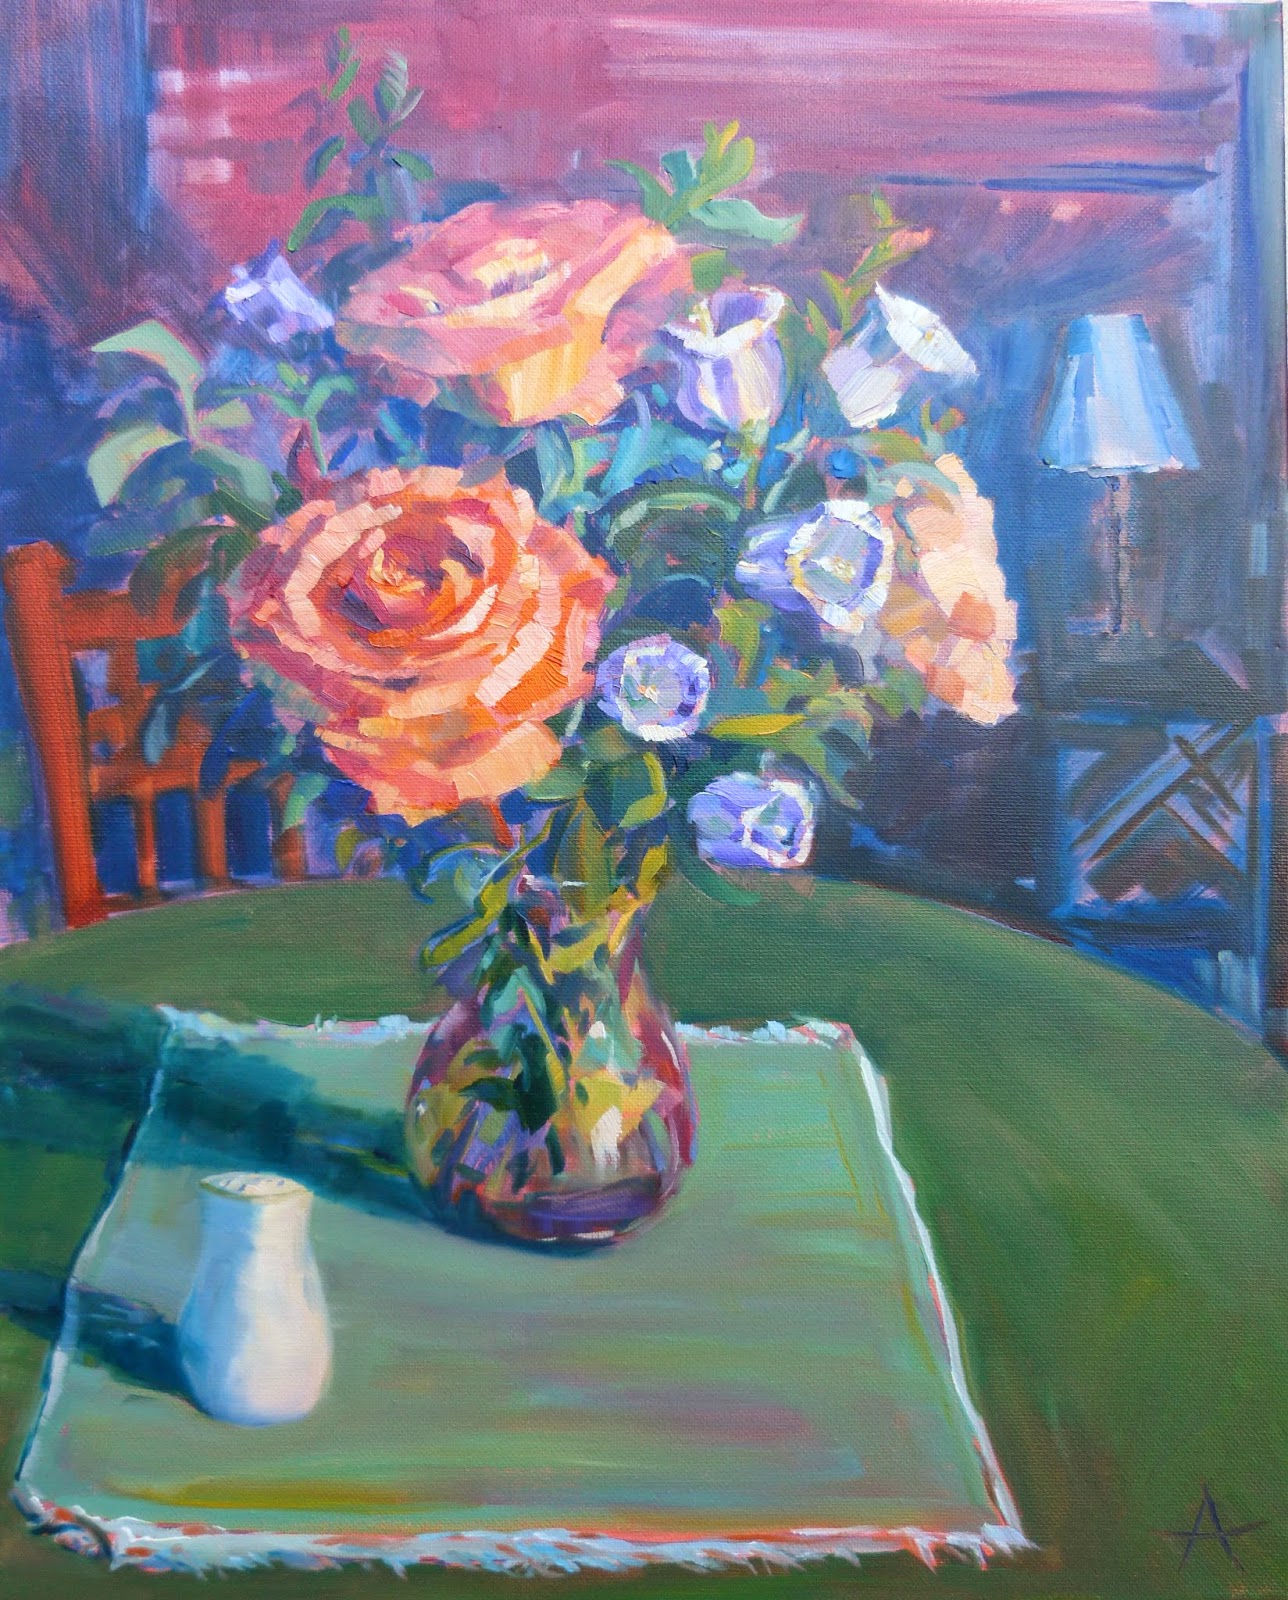 SOLD, Coral Roses and Bellflowers, Copyright 2014 Hirschten, Oil on Canvas, 16" x 20"